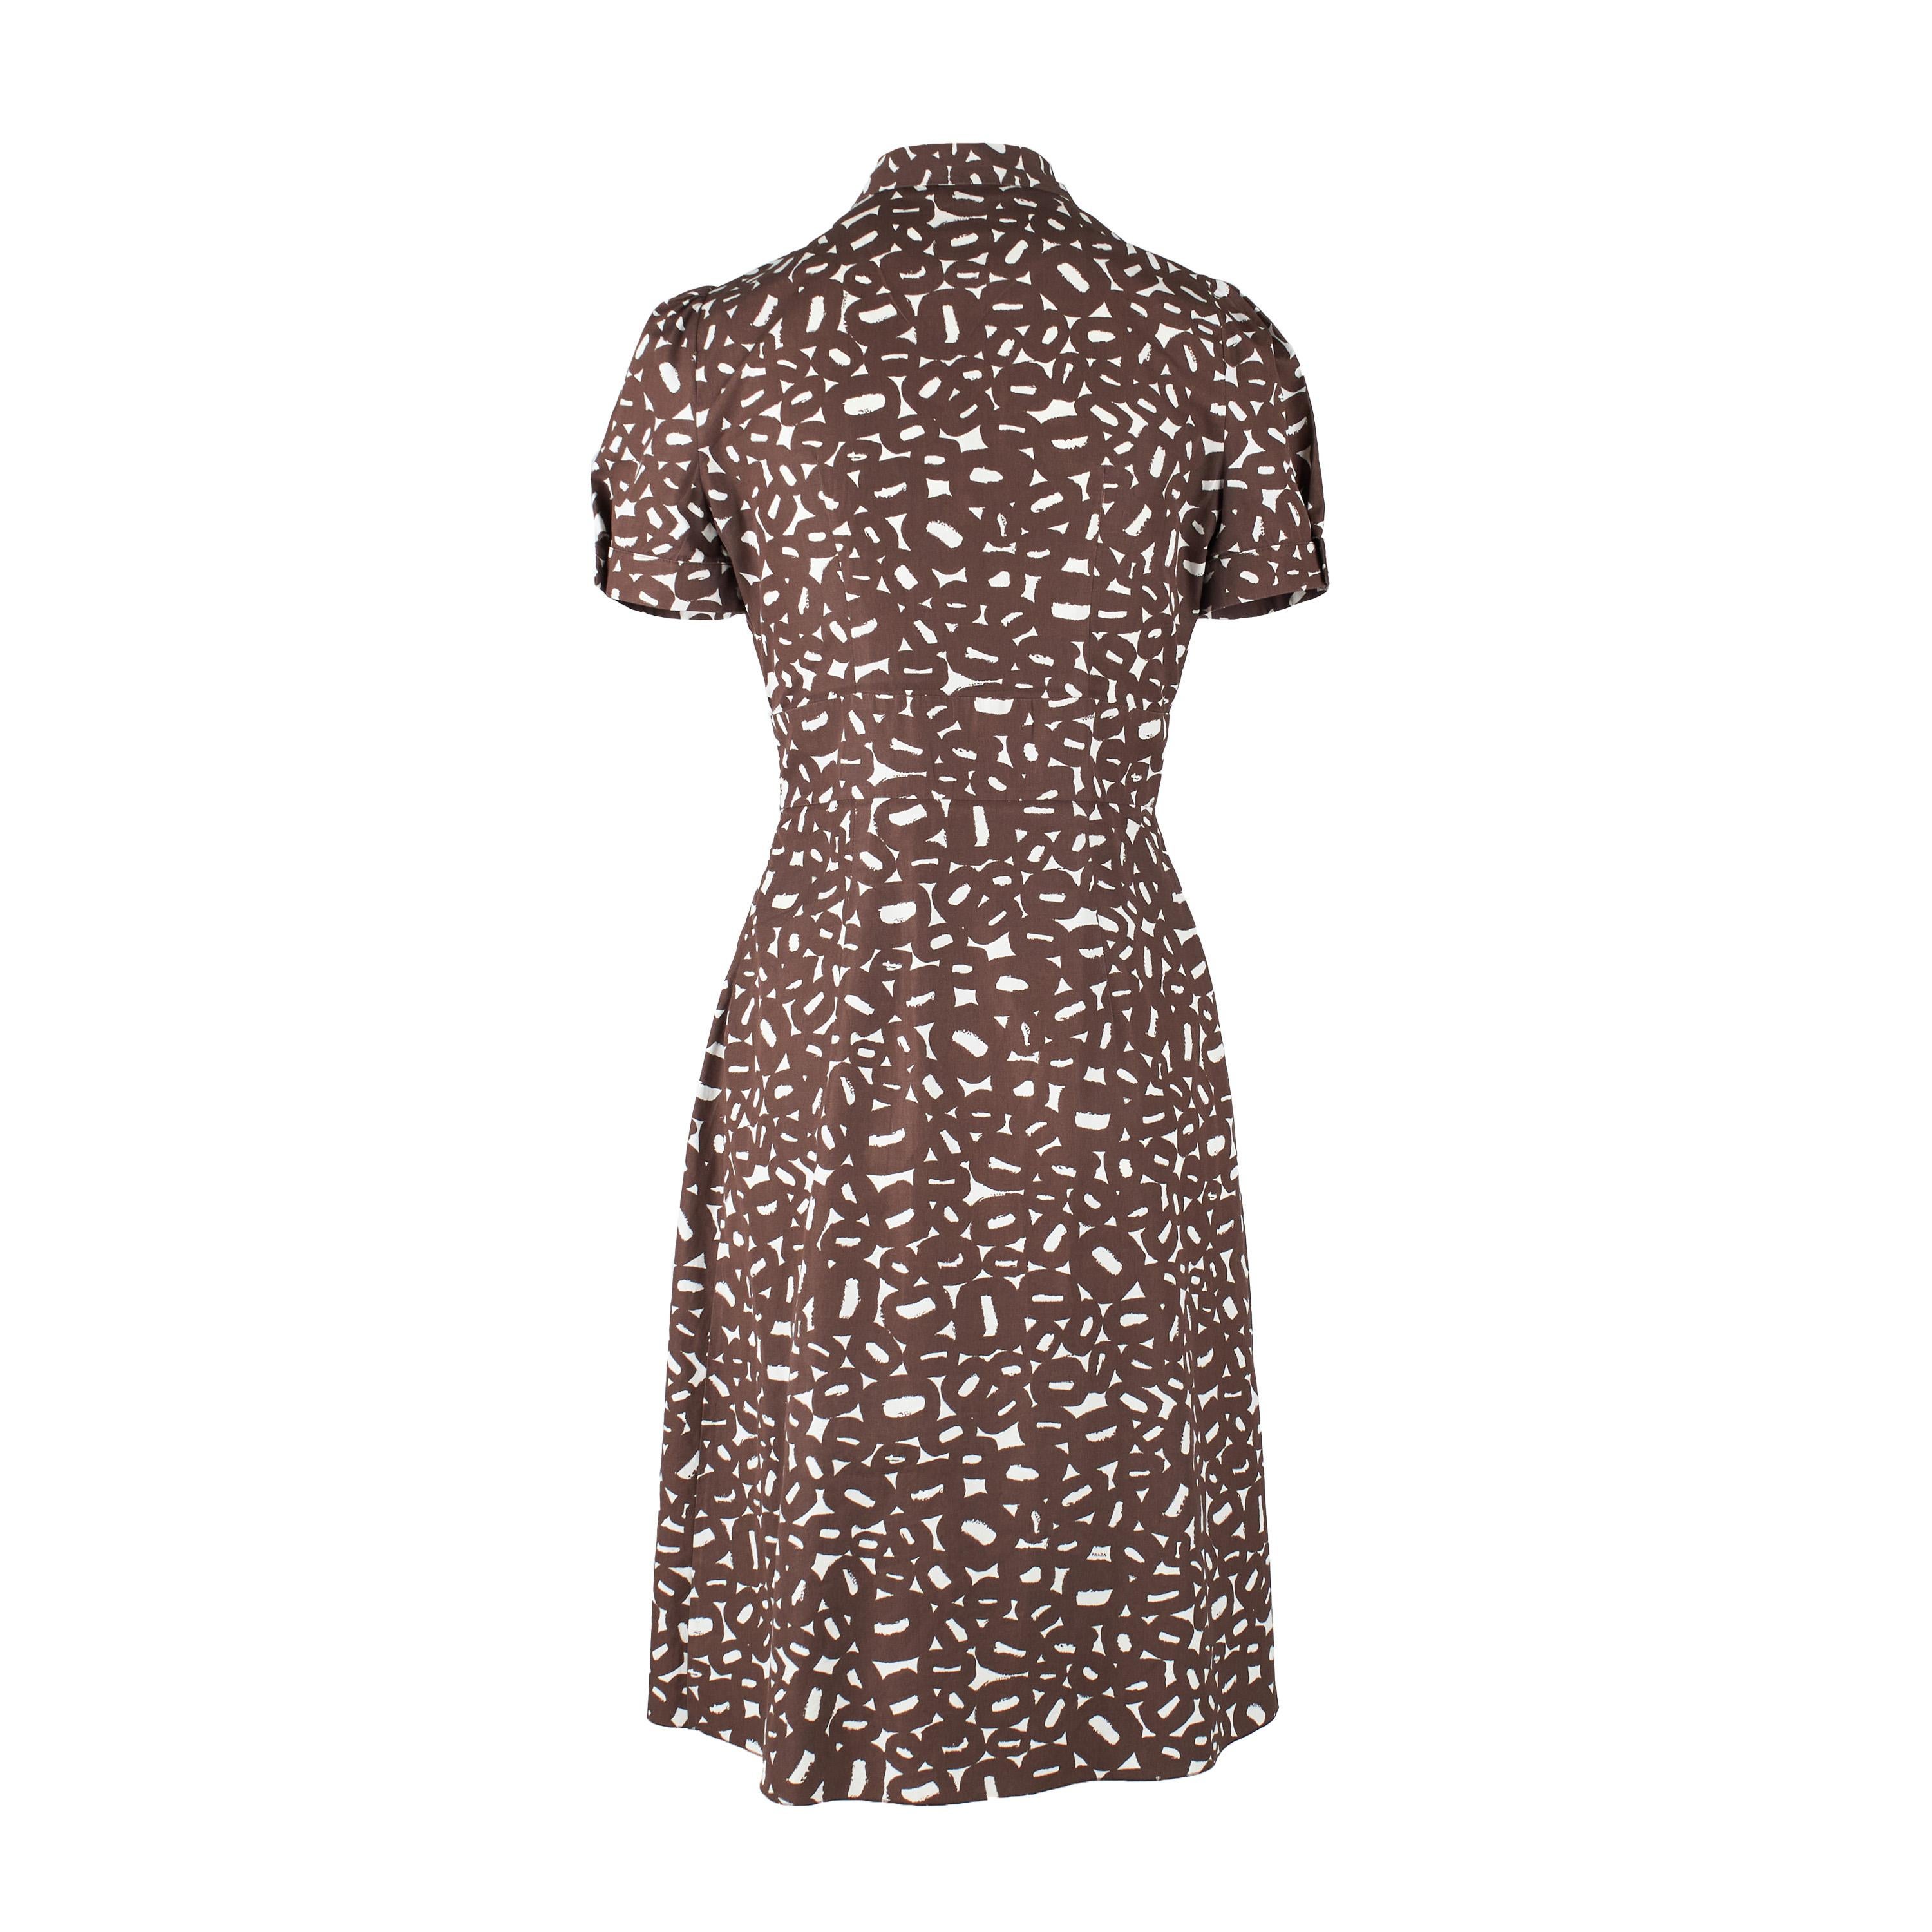 Look chic in this Prada printed midi dress, crafted from comfortable material. The serene brown abstract print is complemented by the collar, short pleated sleeves with cuffed hems, and pleats at the waist for a tailored fit. The front buttons and